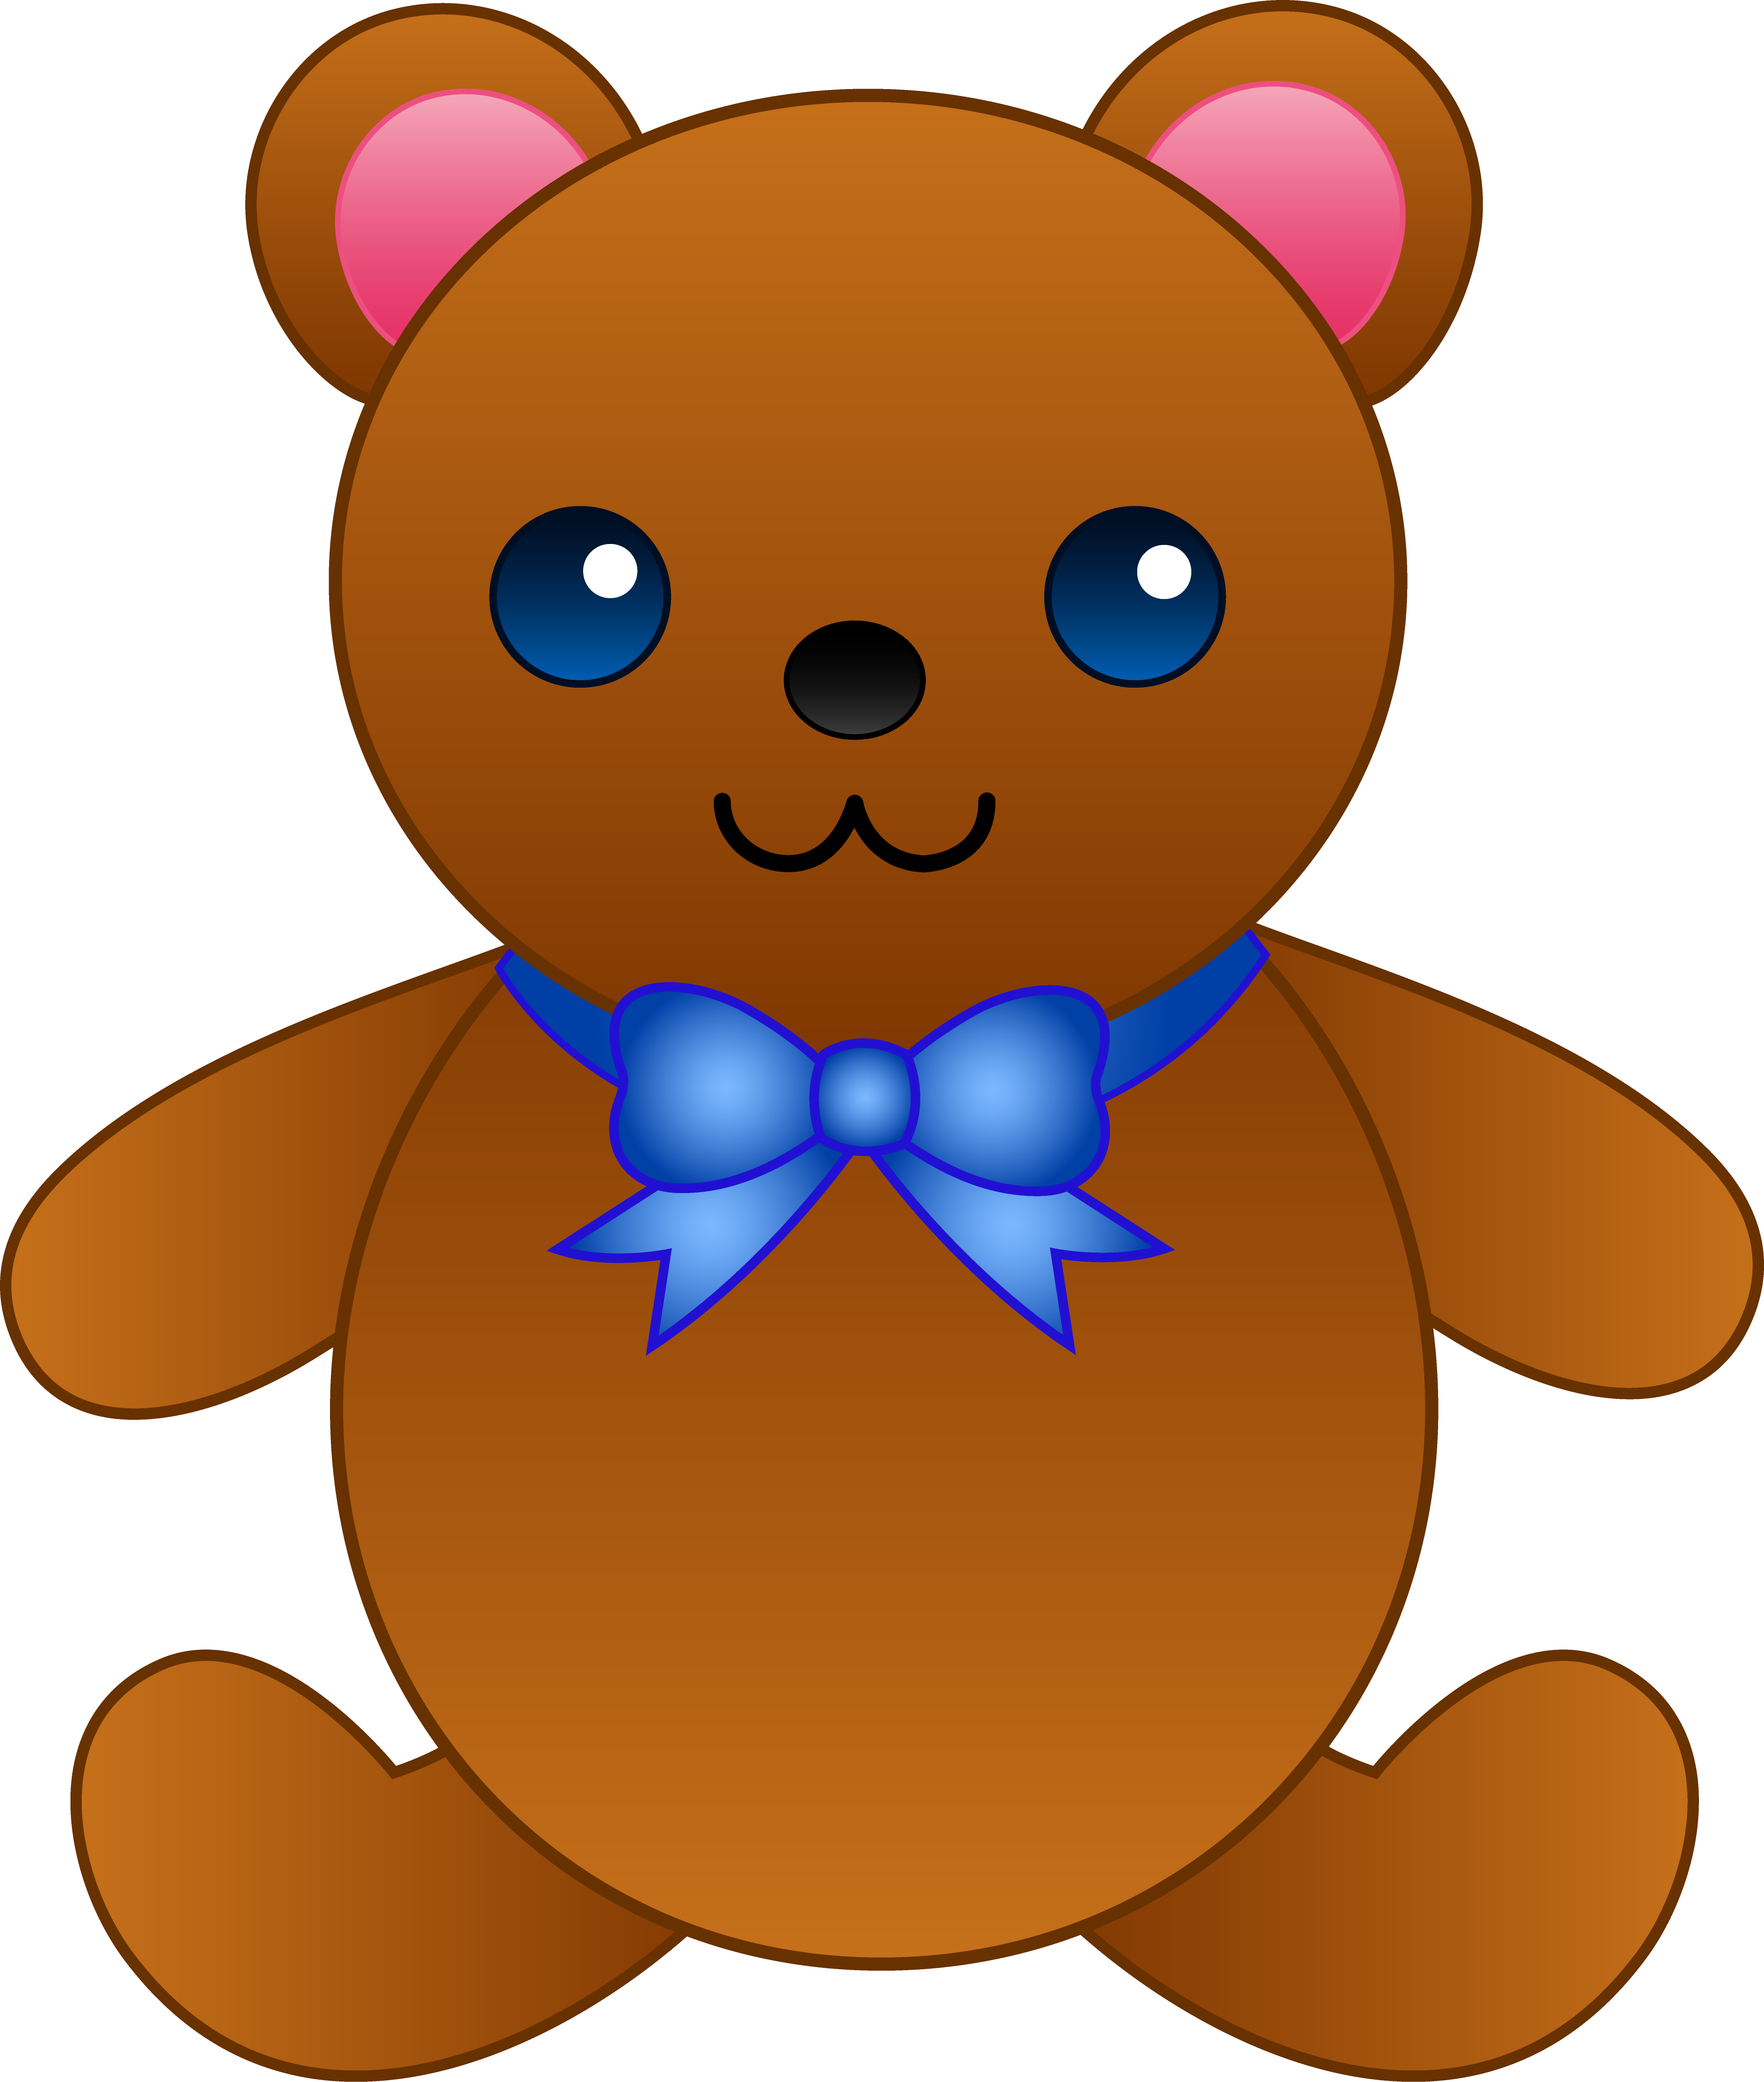 Teddy bear clipart free clipart images 10